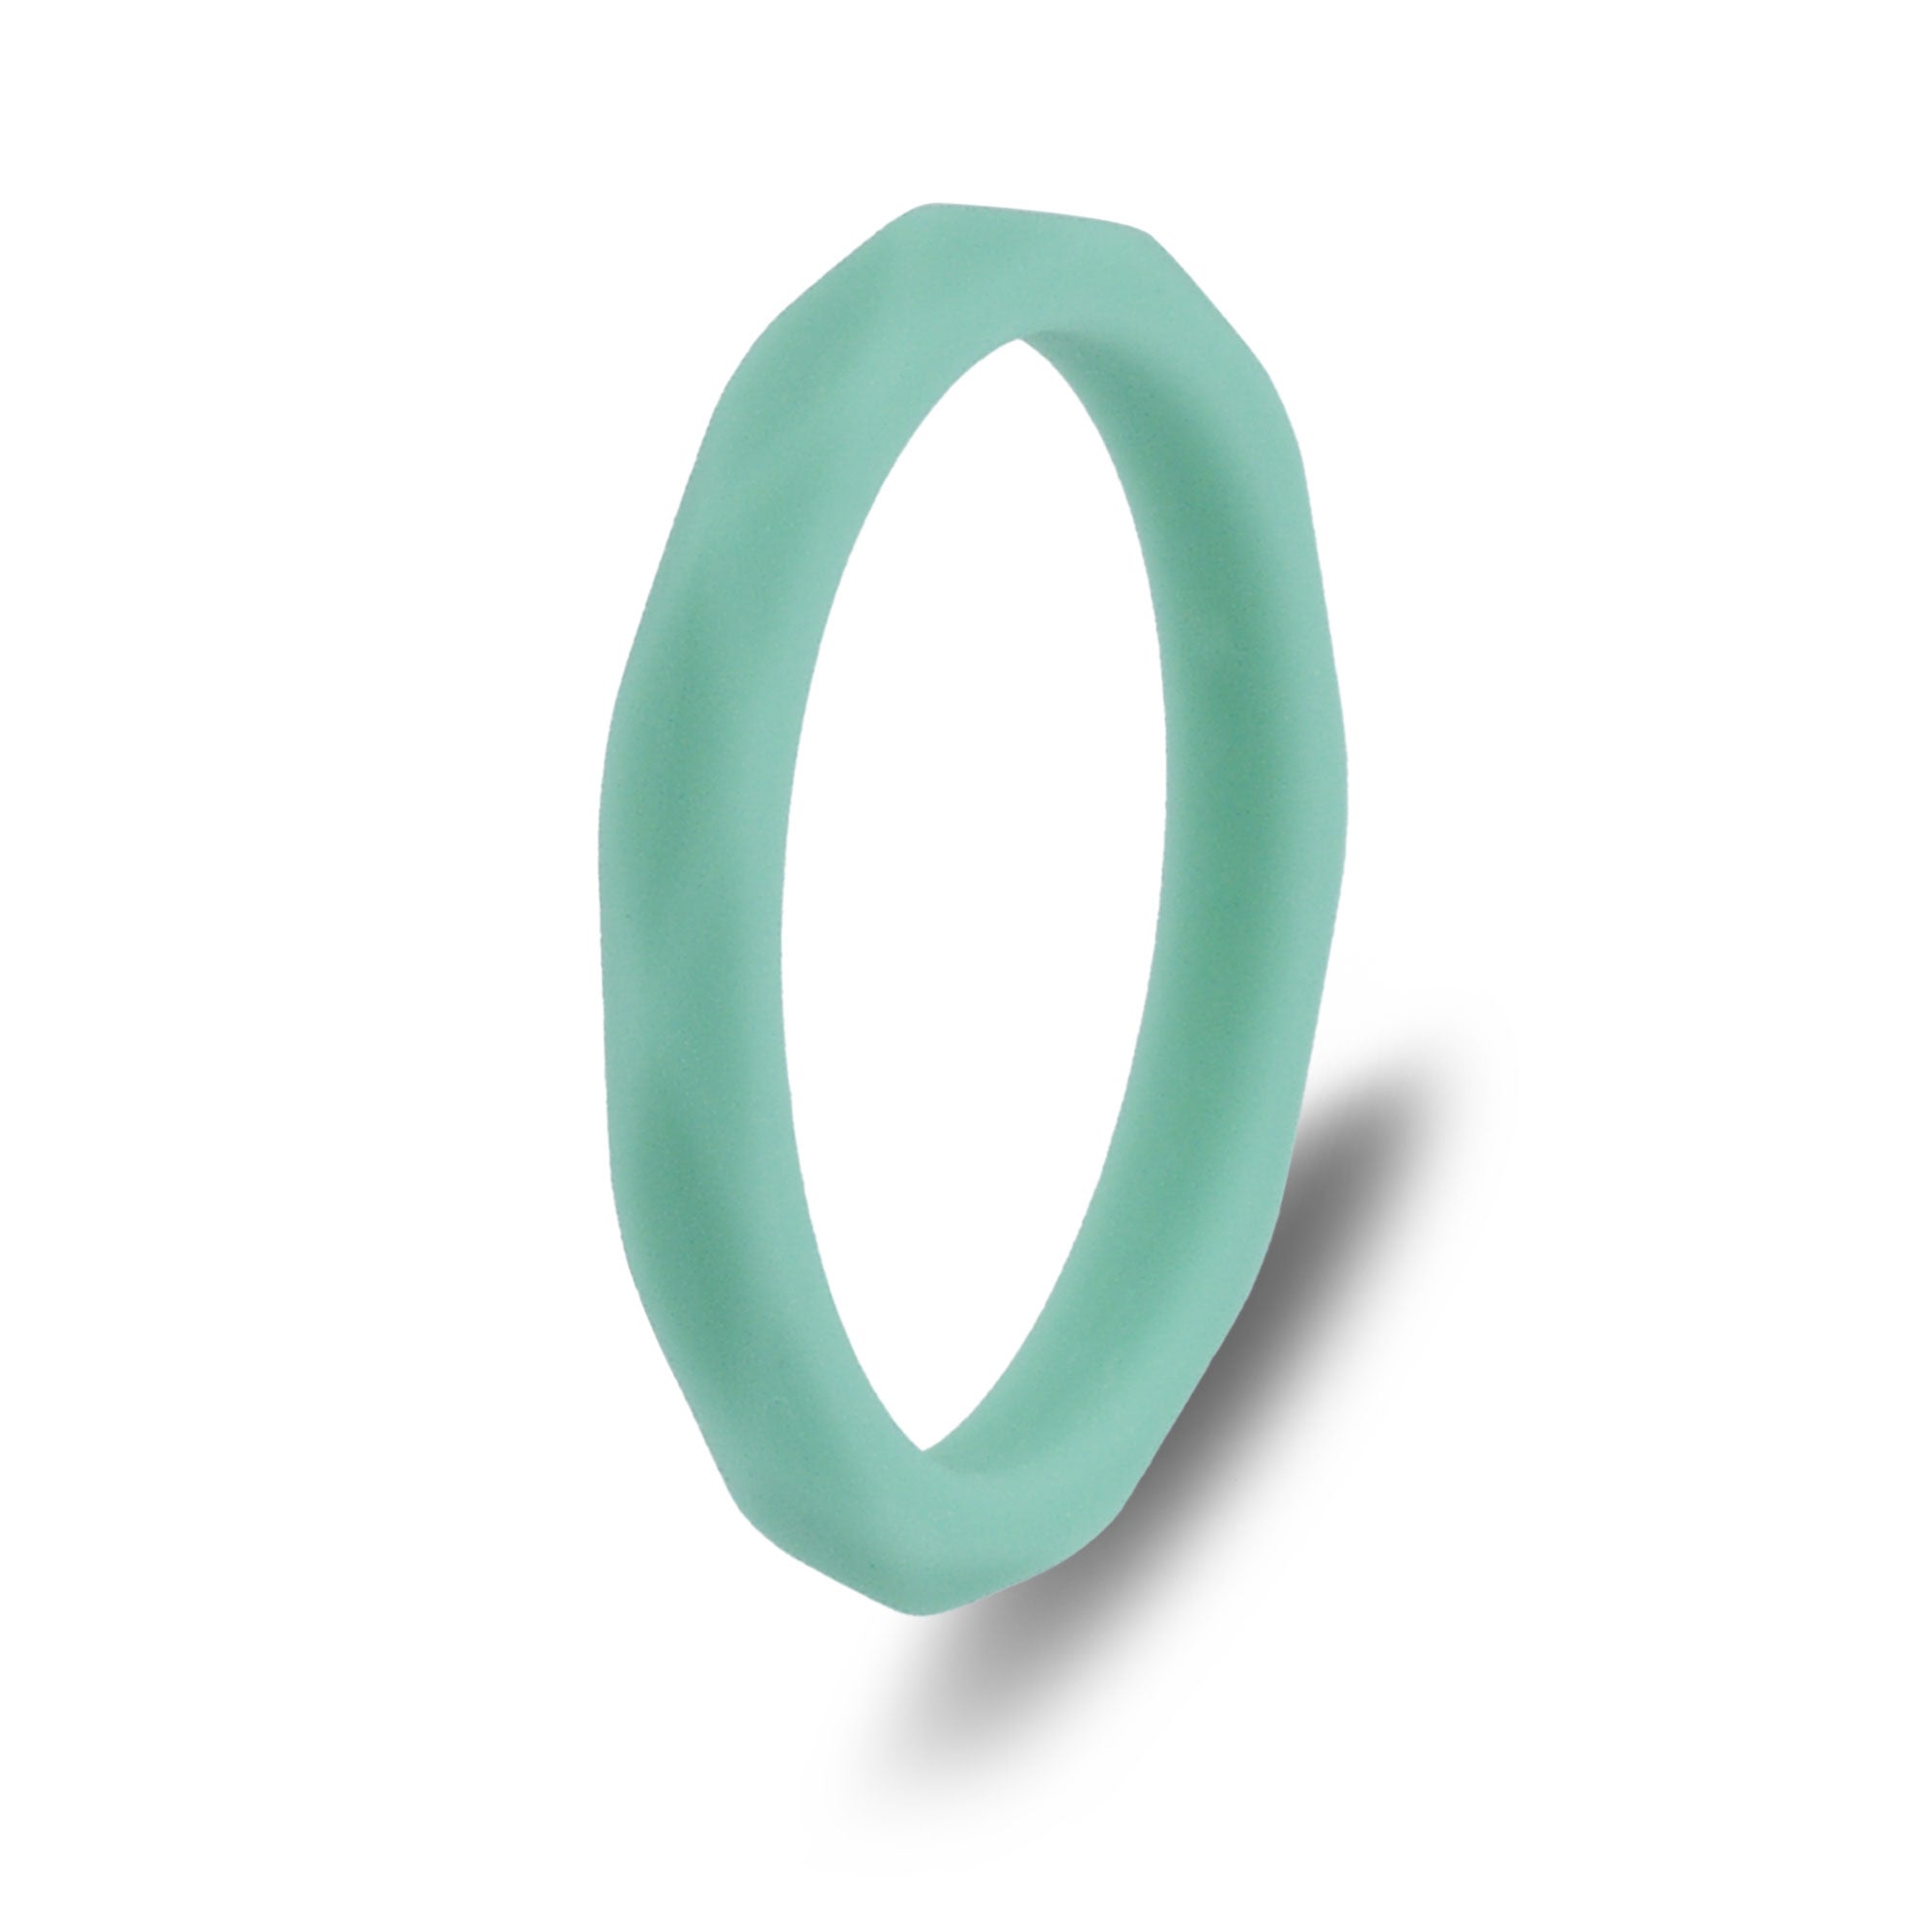 The Ocean Halo - Silicone Ring